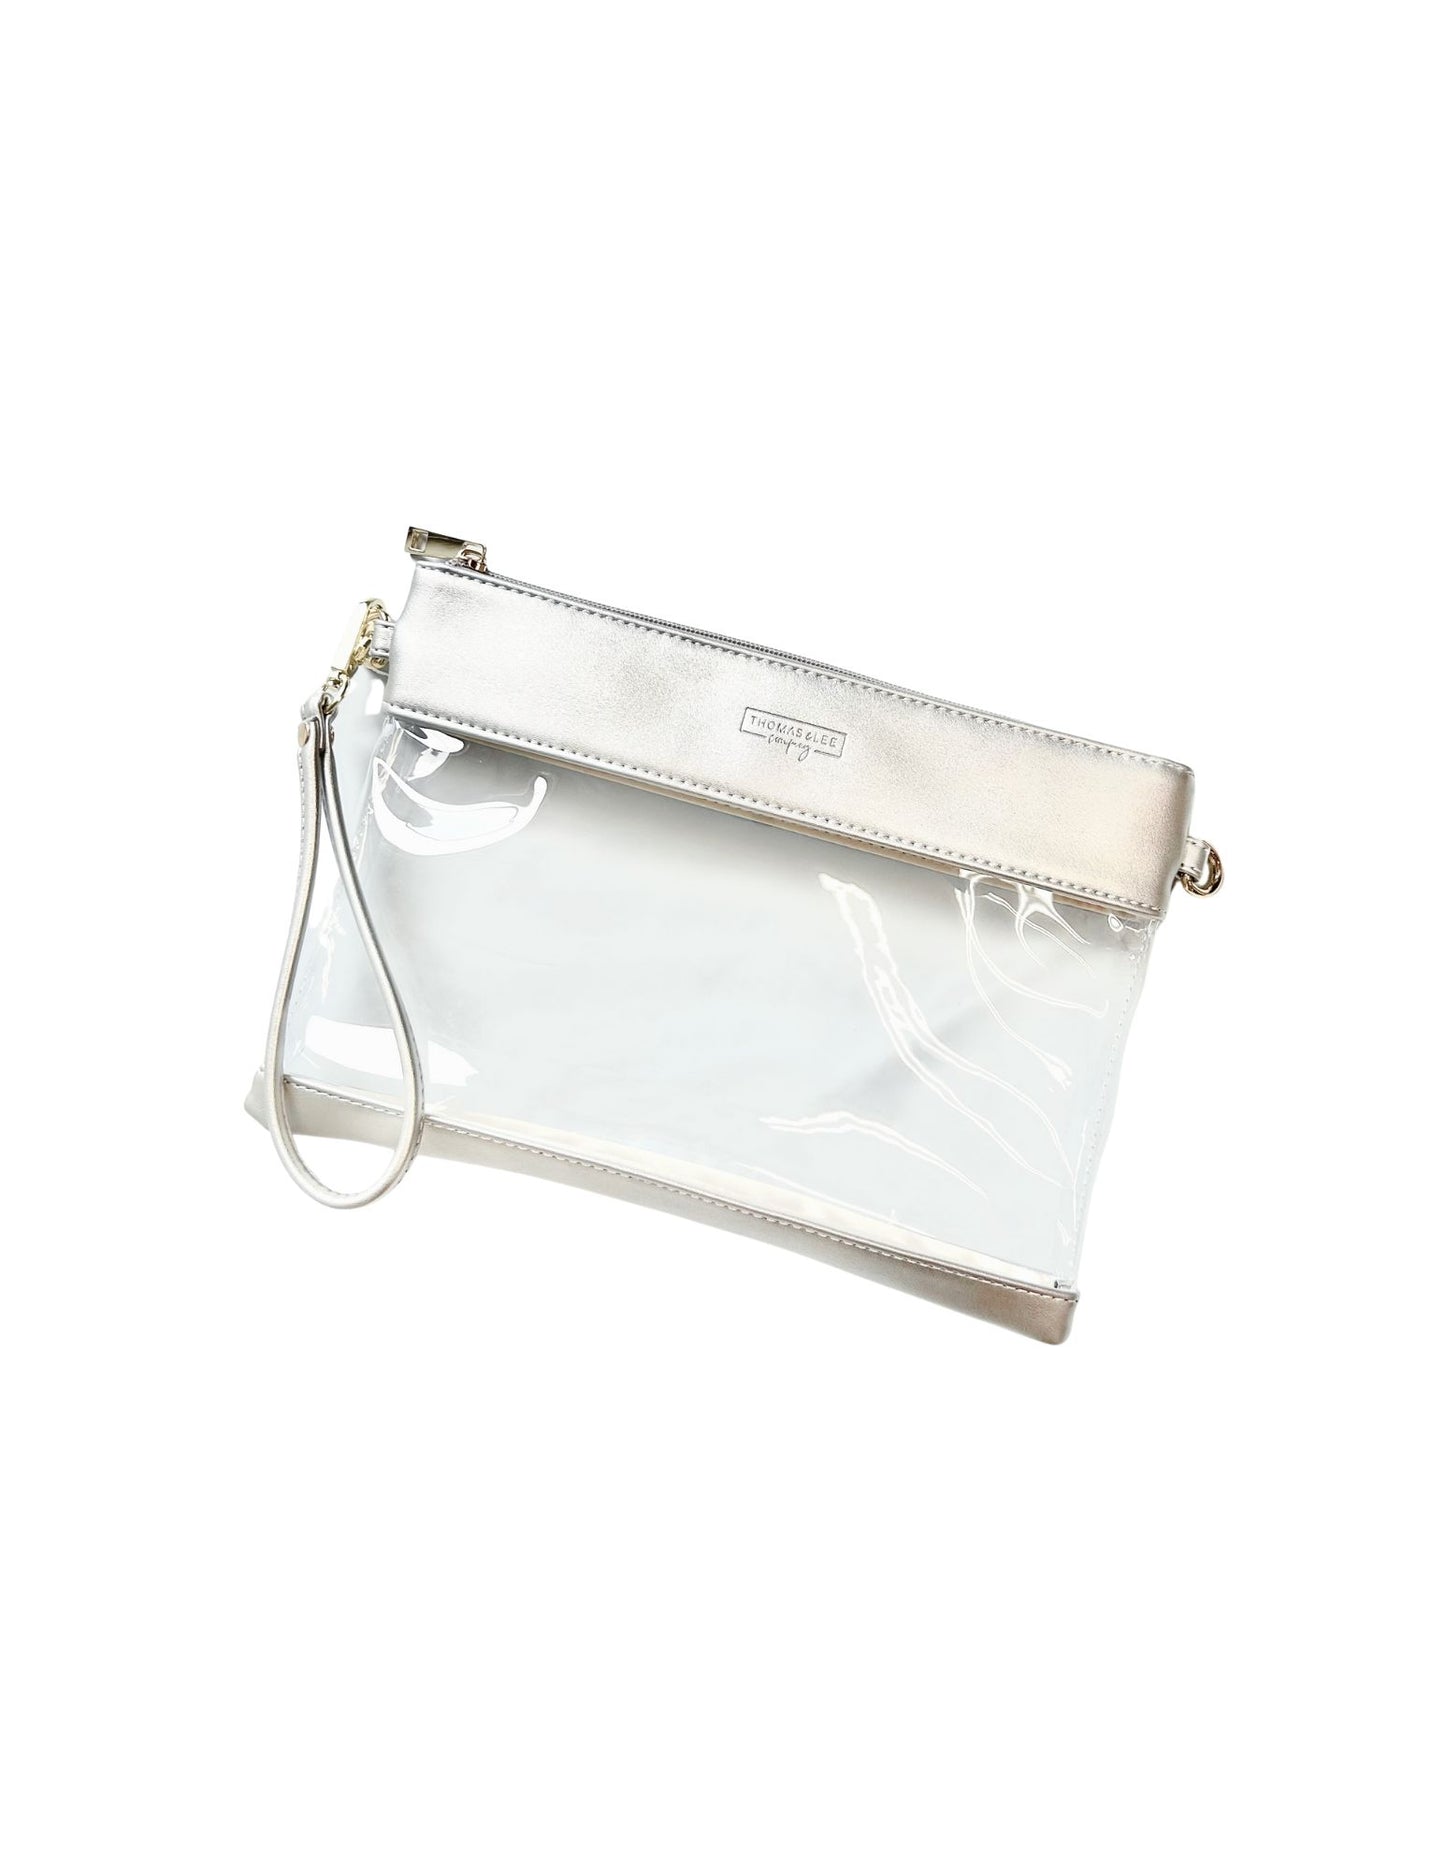 Clear Gameday Wristlet - Stadium Approved